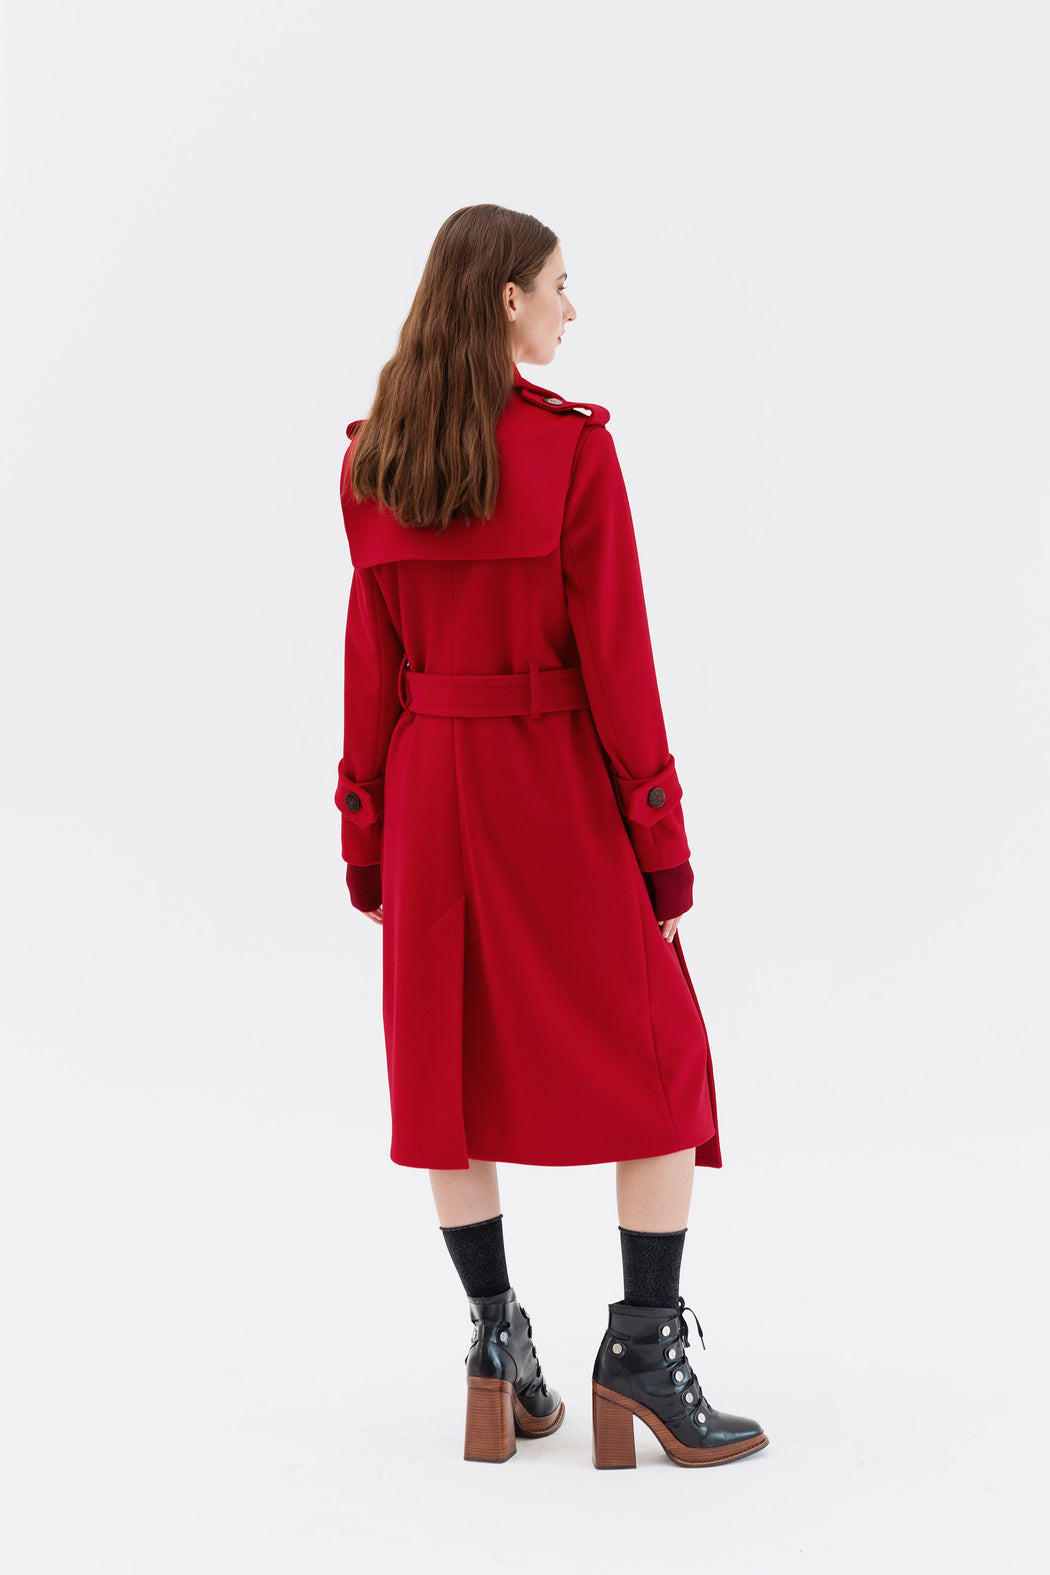 LAST PIECE! APPLE RED WOOL TRENCH 22